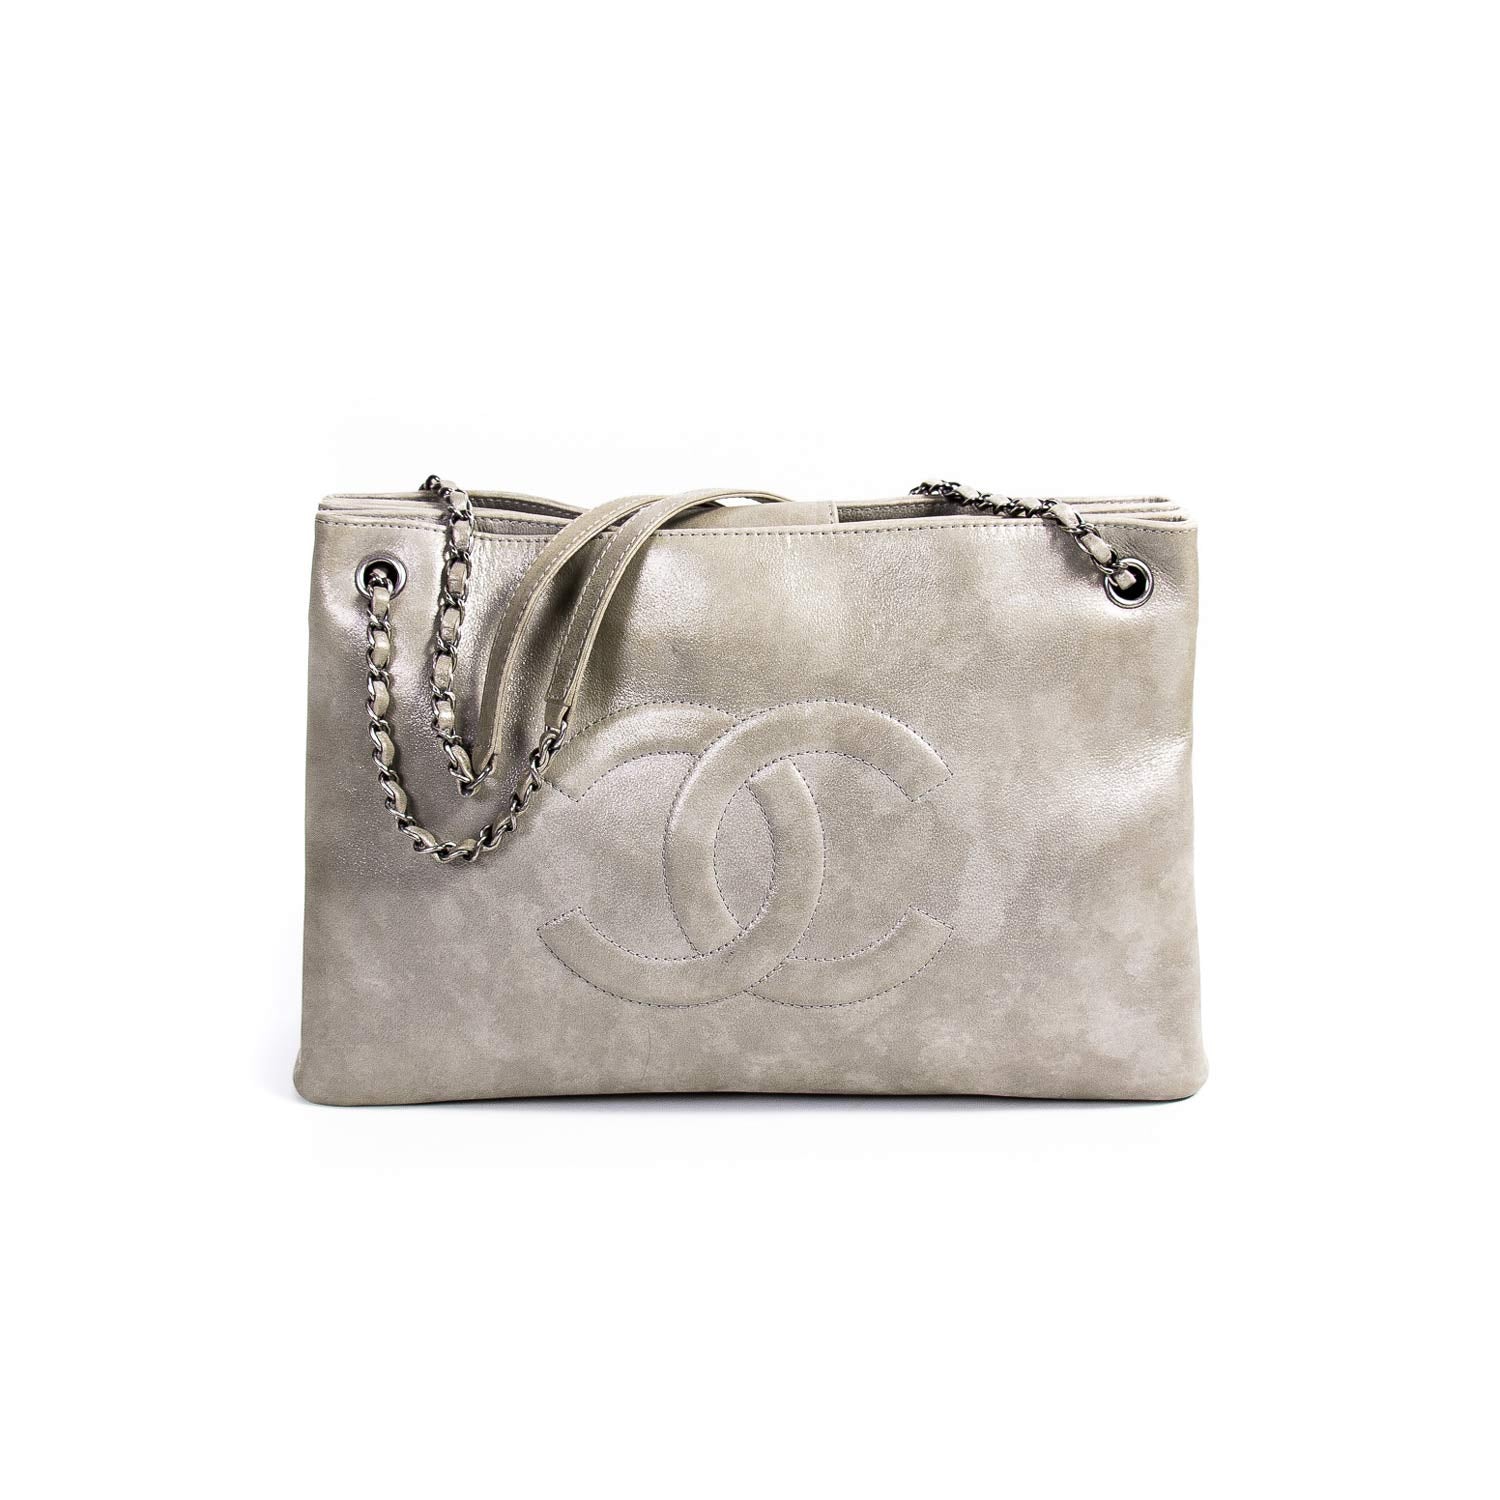 Shop authentic Chanel Iridescent Timeless Accordion Tote at